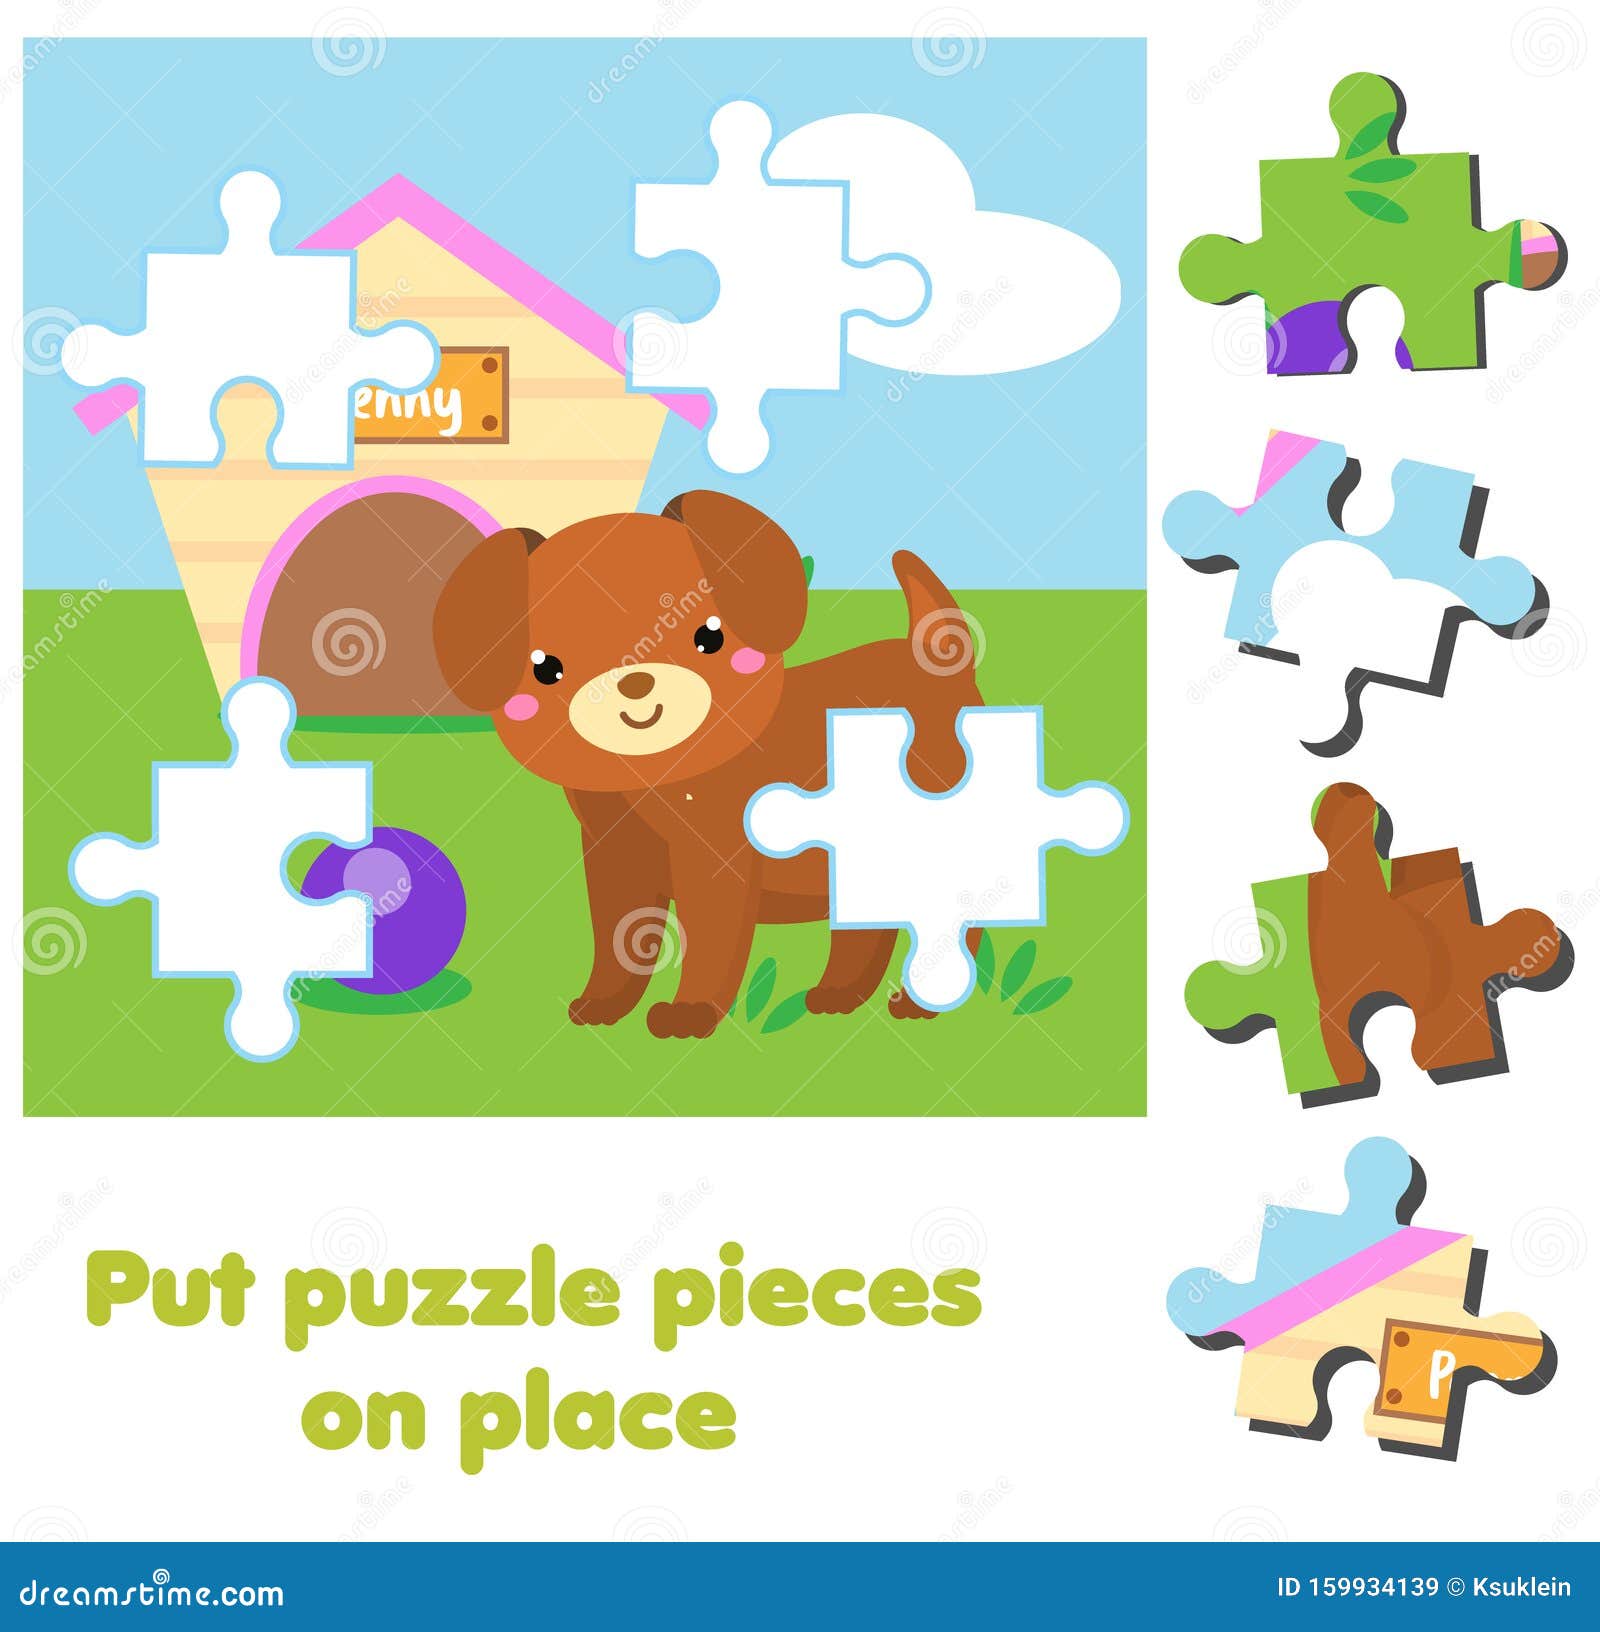 Cartoon Dog. Jigsaw Puzzle for Toddlers. Match Pieces and Complete Picture.  Educational Game for Children Stock Vector - Illustration of classes,  kindergarten: 159934139